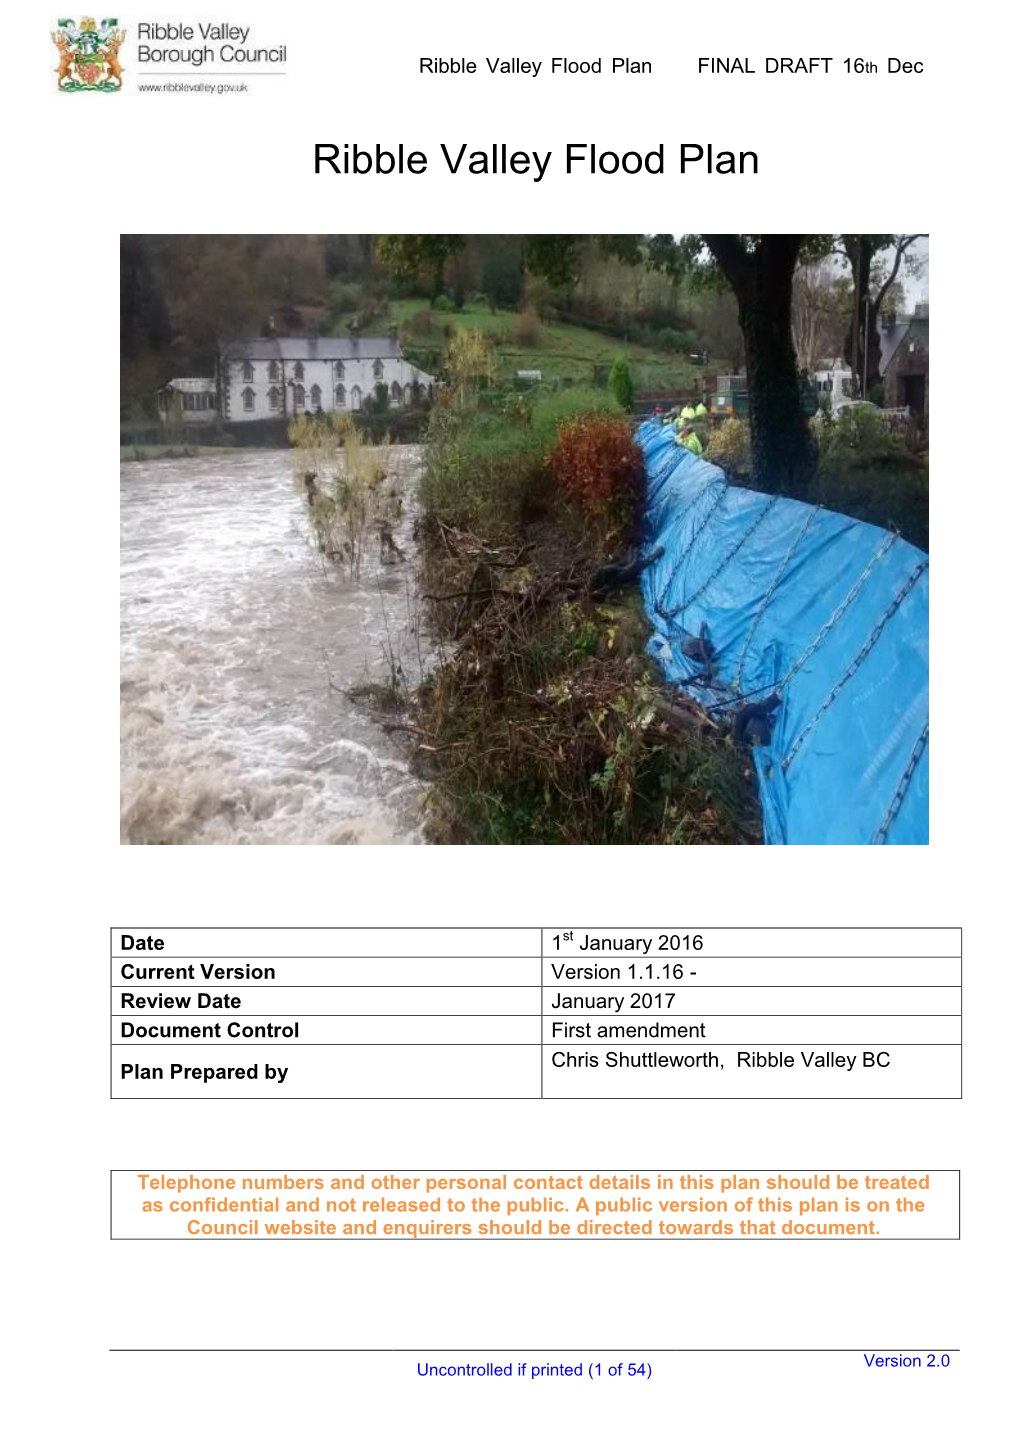 Multi Agency Flood Plan for Lancashire and the Ribble Valley ‘District Emergency Plan’